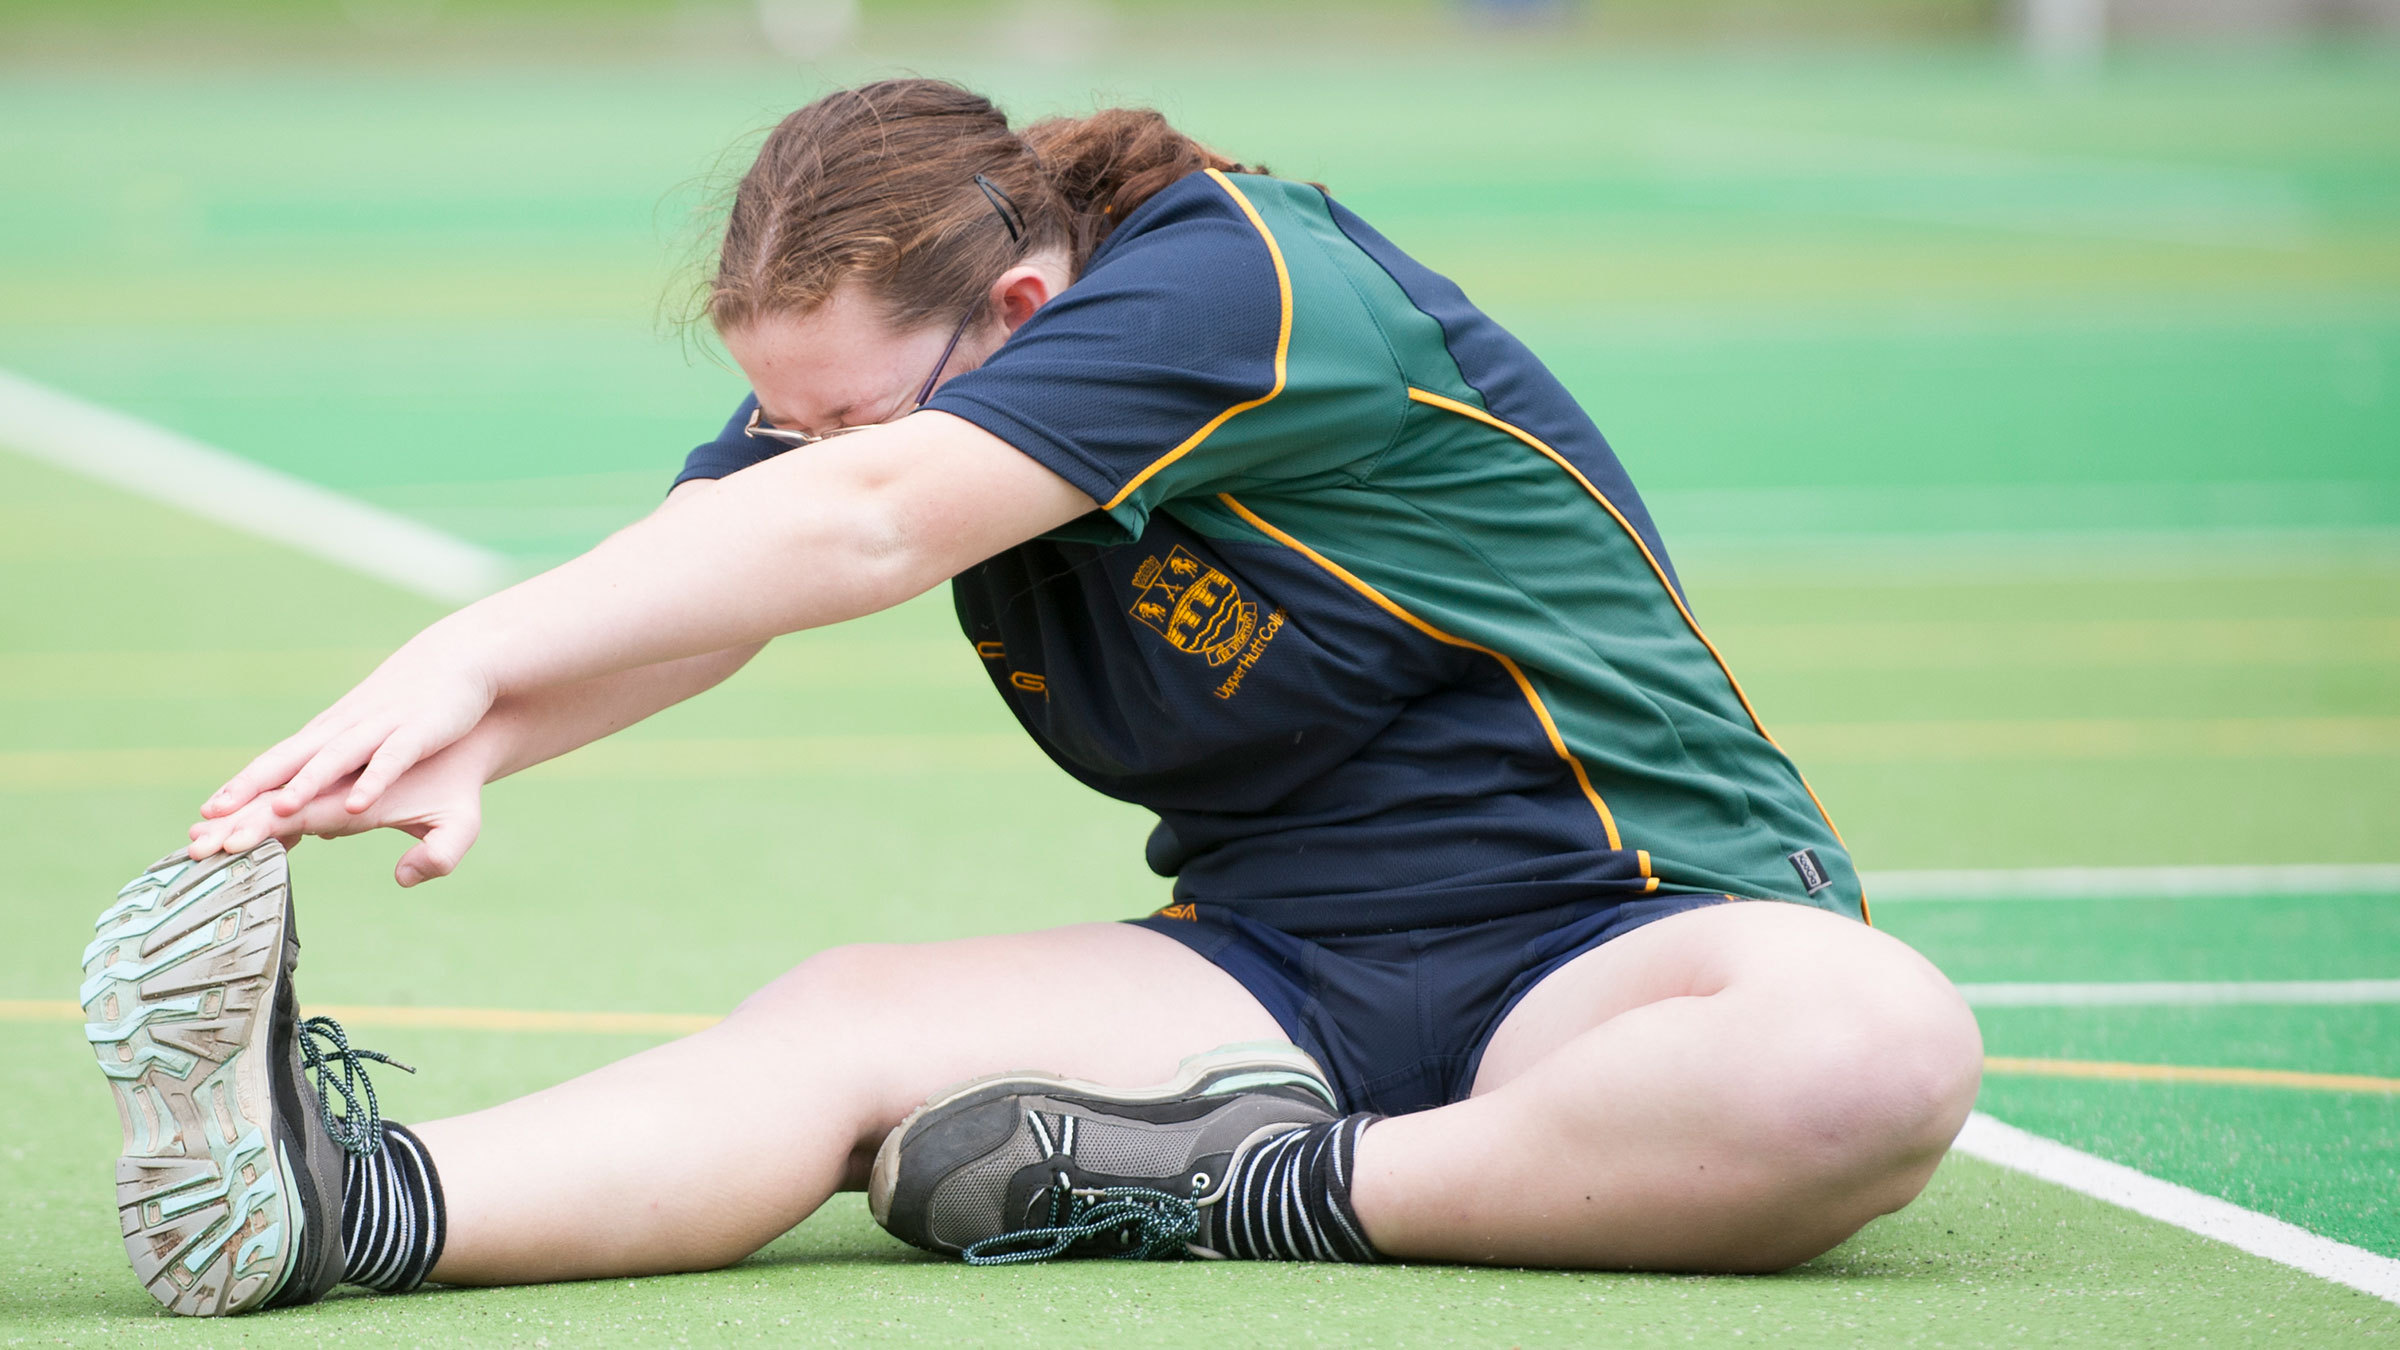 A teenage student stretching on a green court